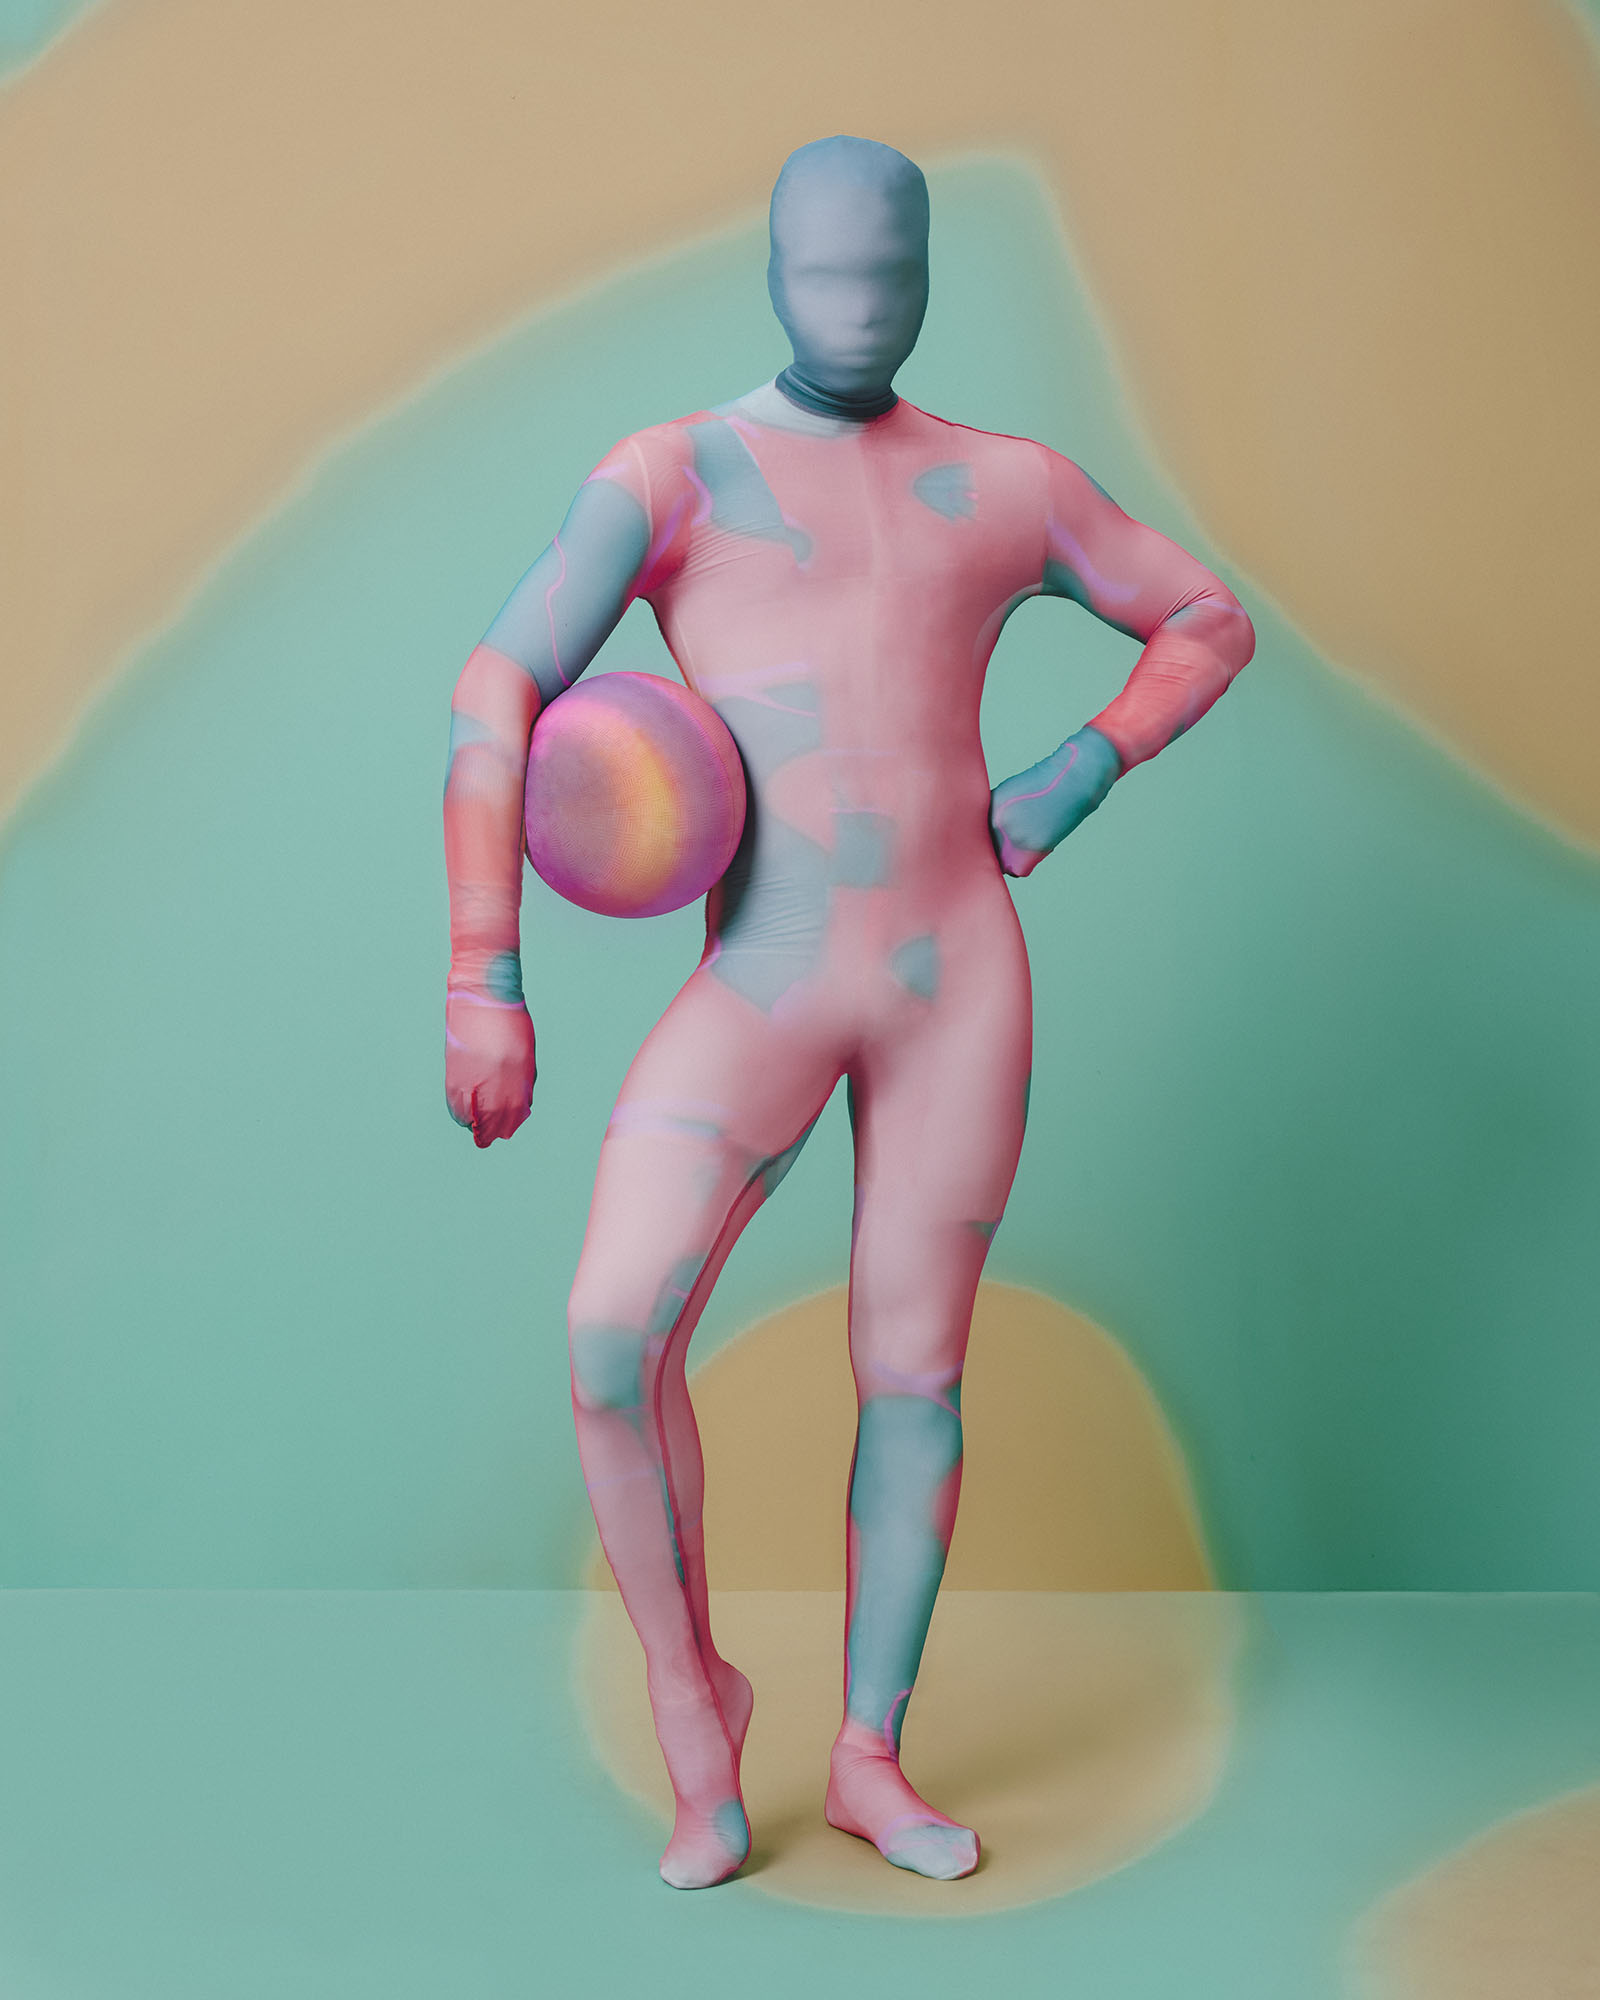 A person covered in a multicolored full-body suit holds a matching ball by their waist.